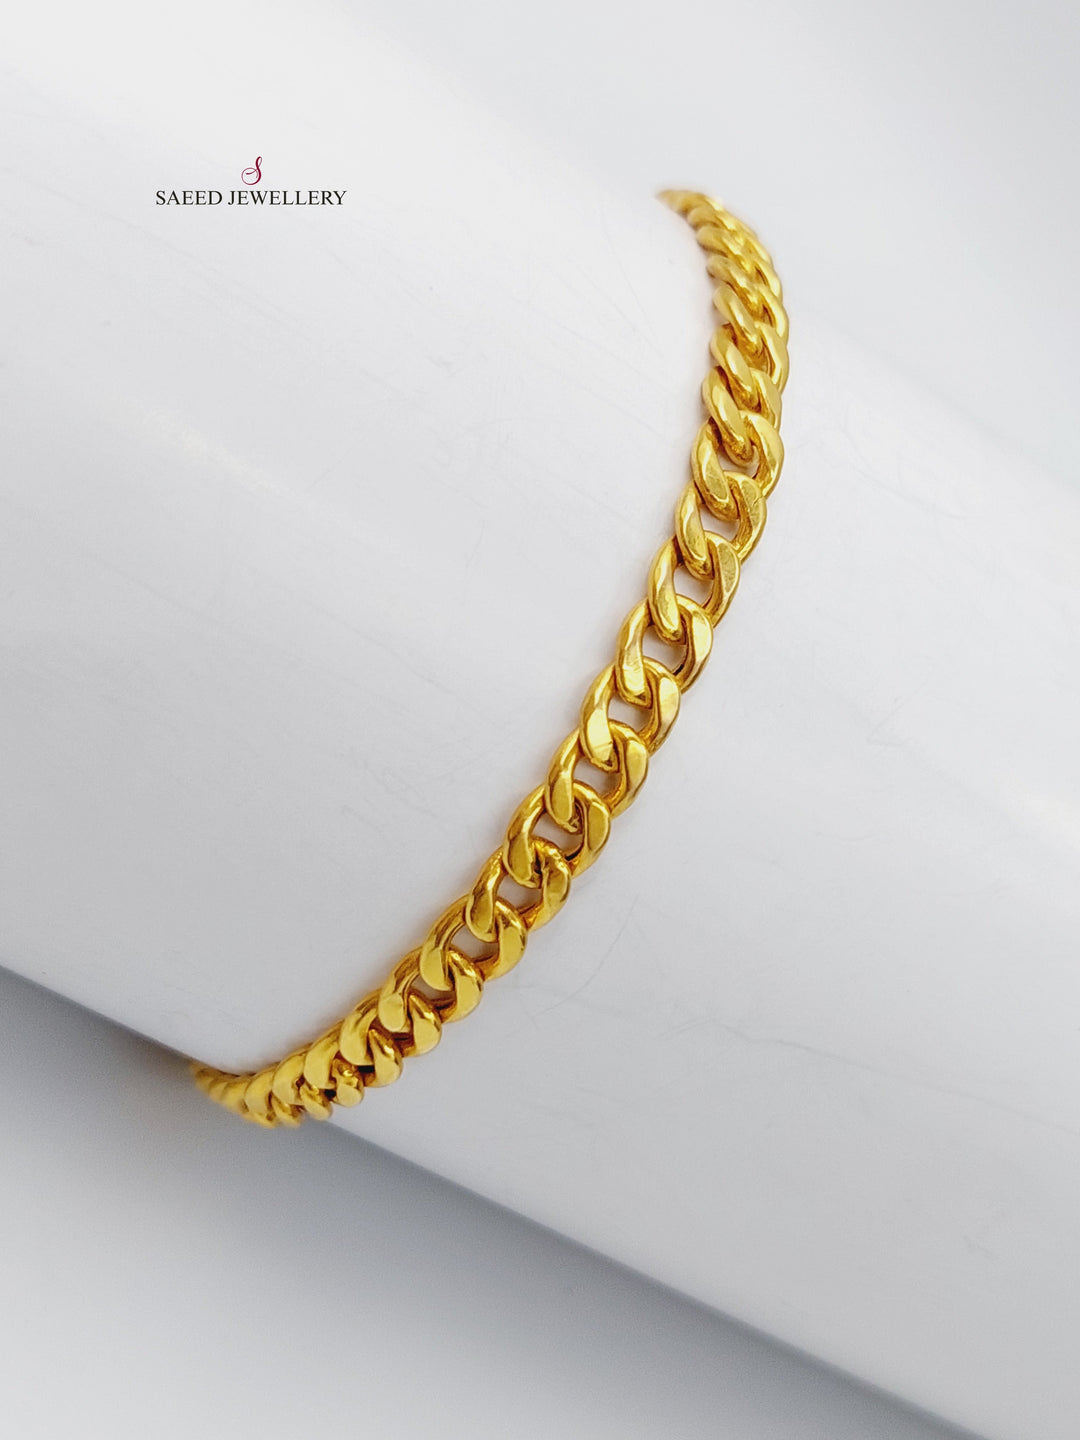 21K Gold Chain Bracelet by Saeed Jewelry - Image 1